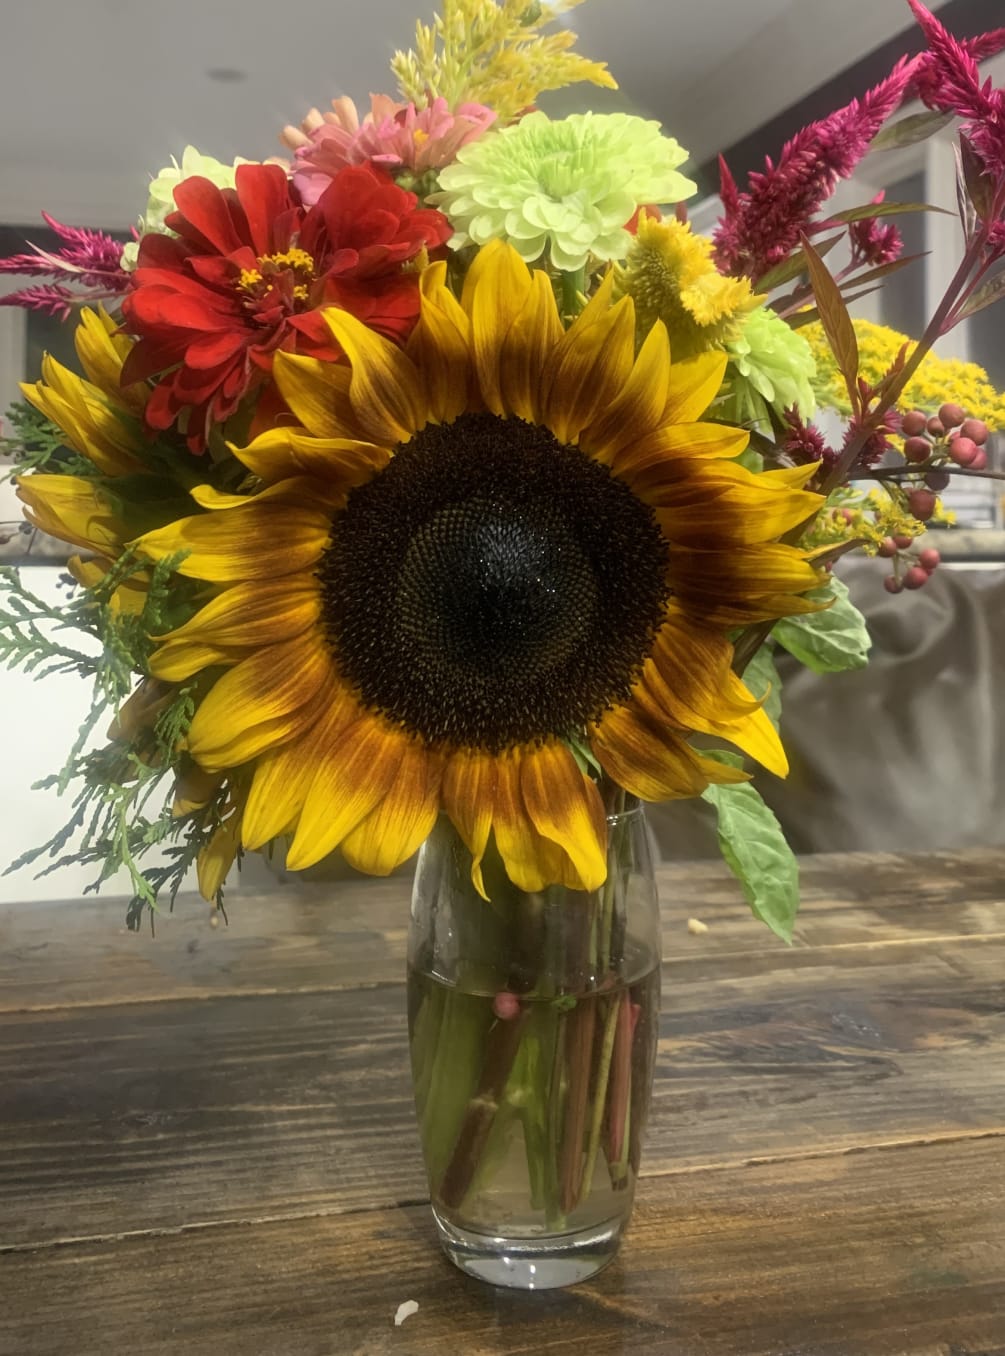 A lovely mixed bouquet with sunflowers and zinnias